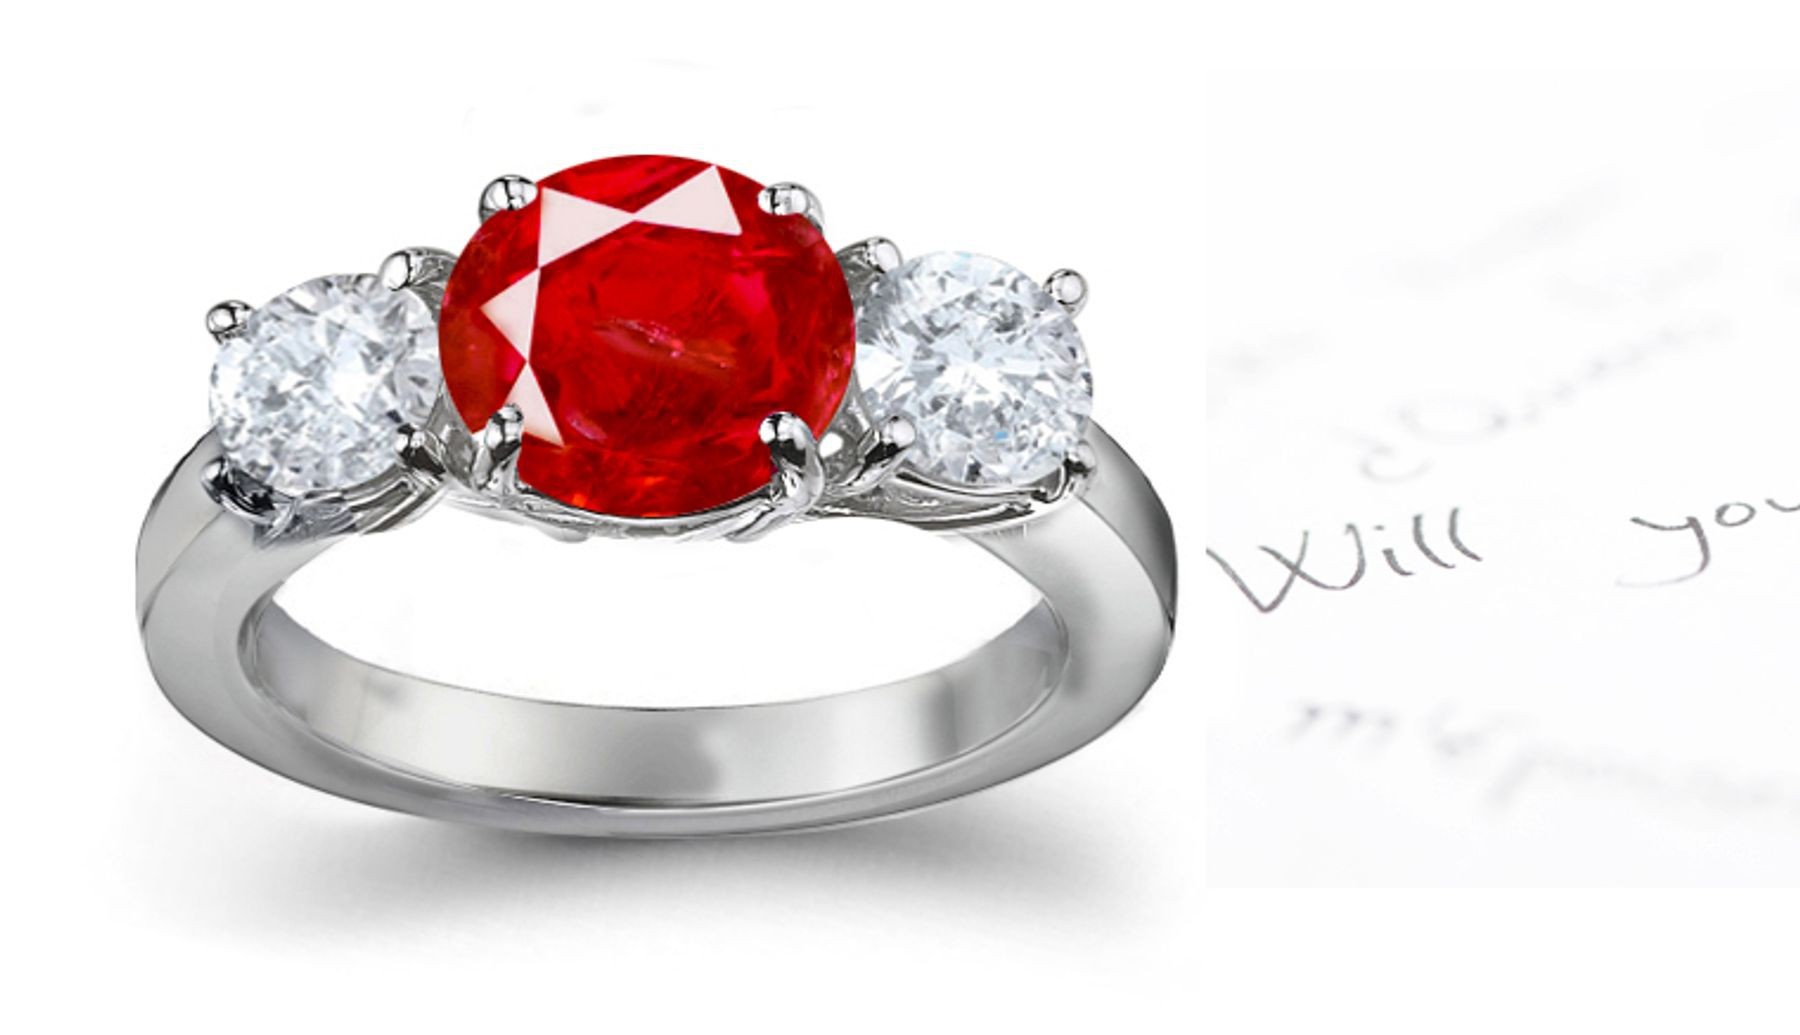 As Red As Your True Love: Sparkling Vivid Ruby Diamond Engagement Rings